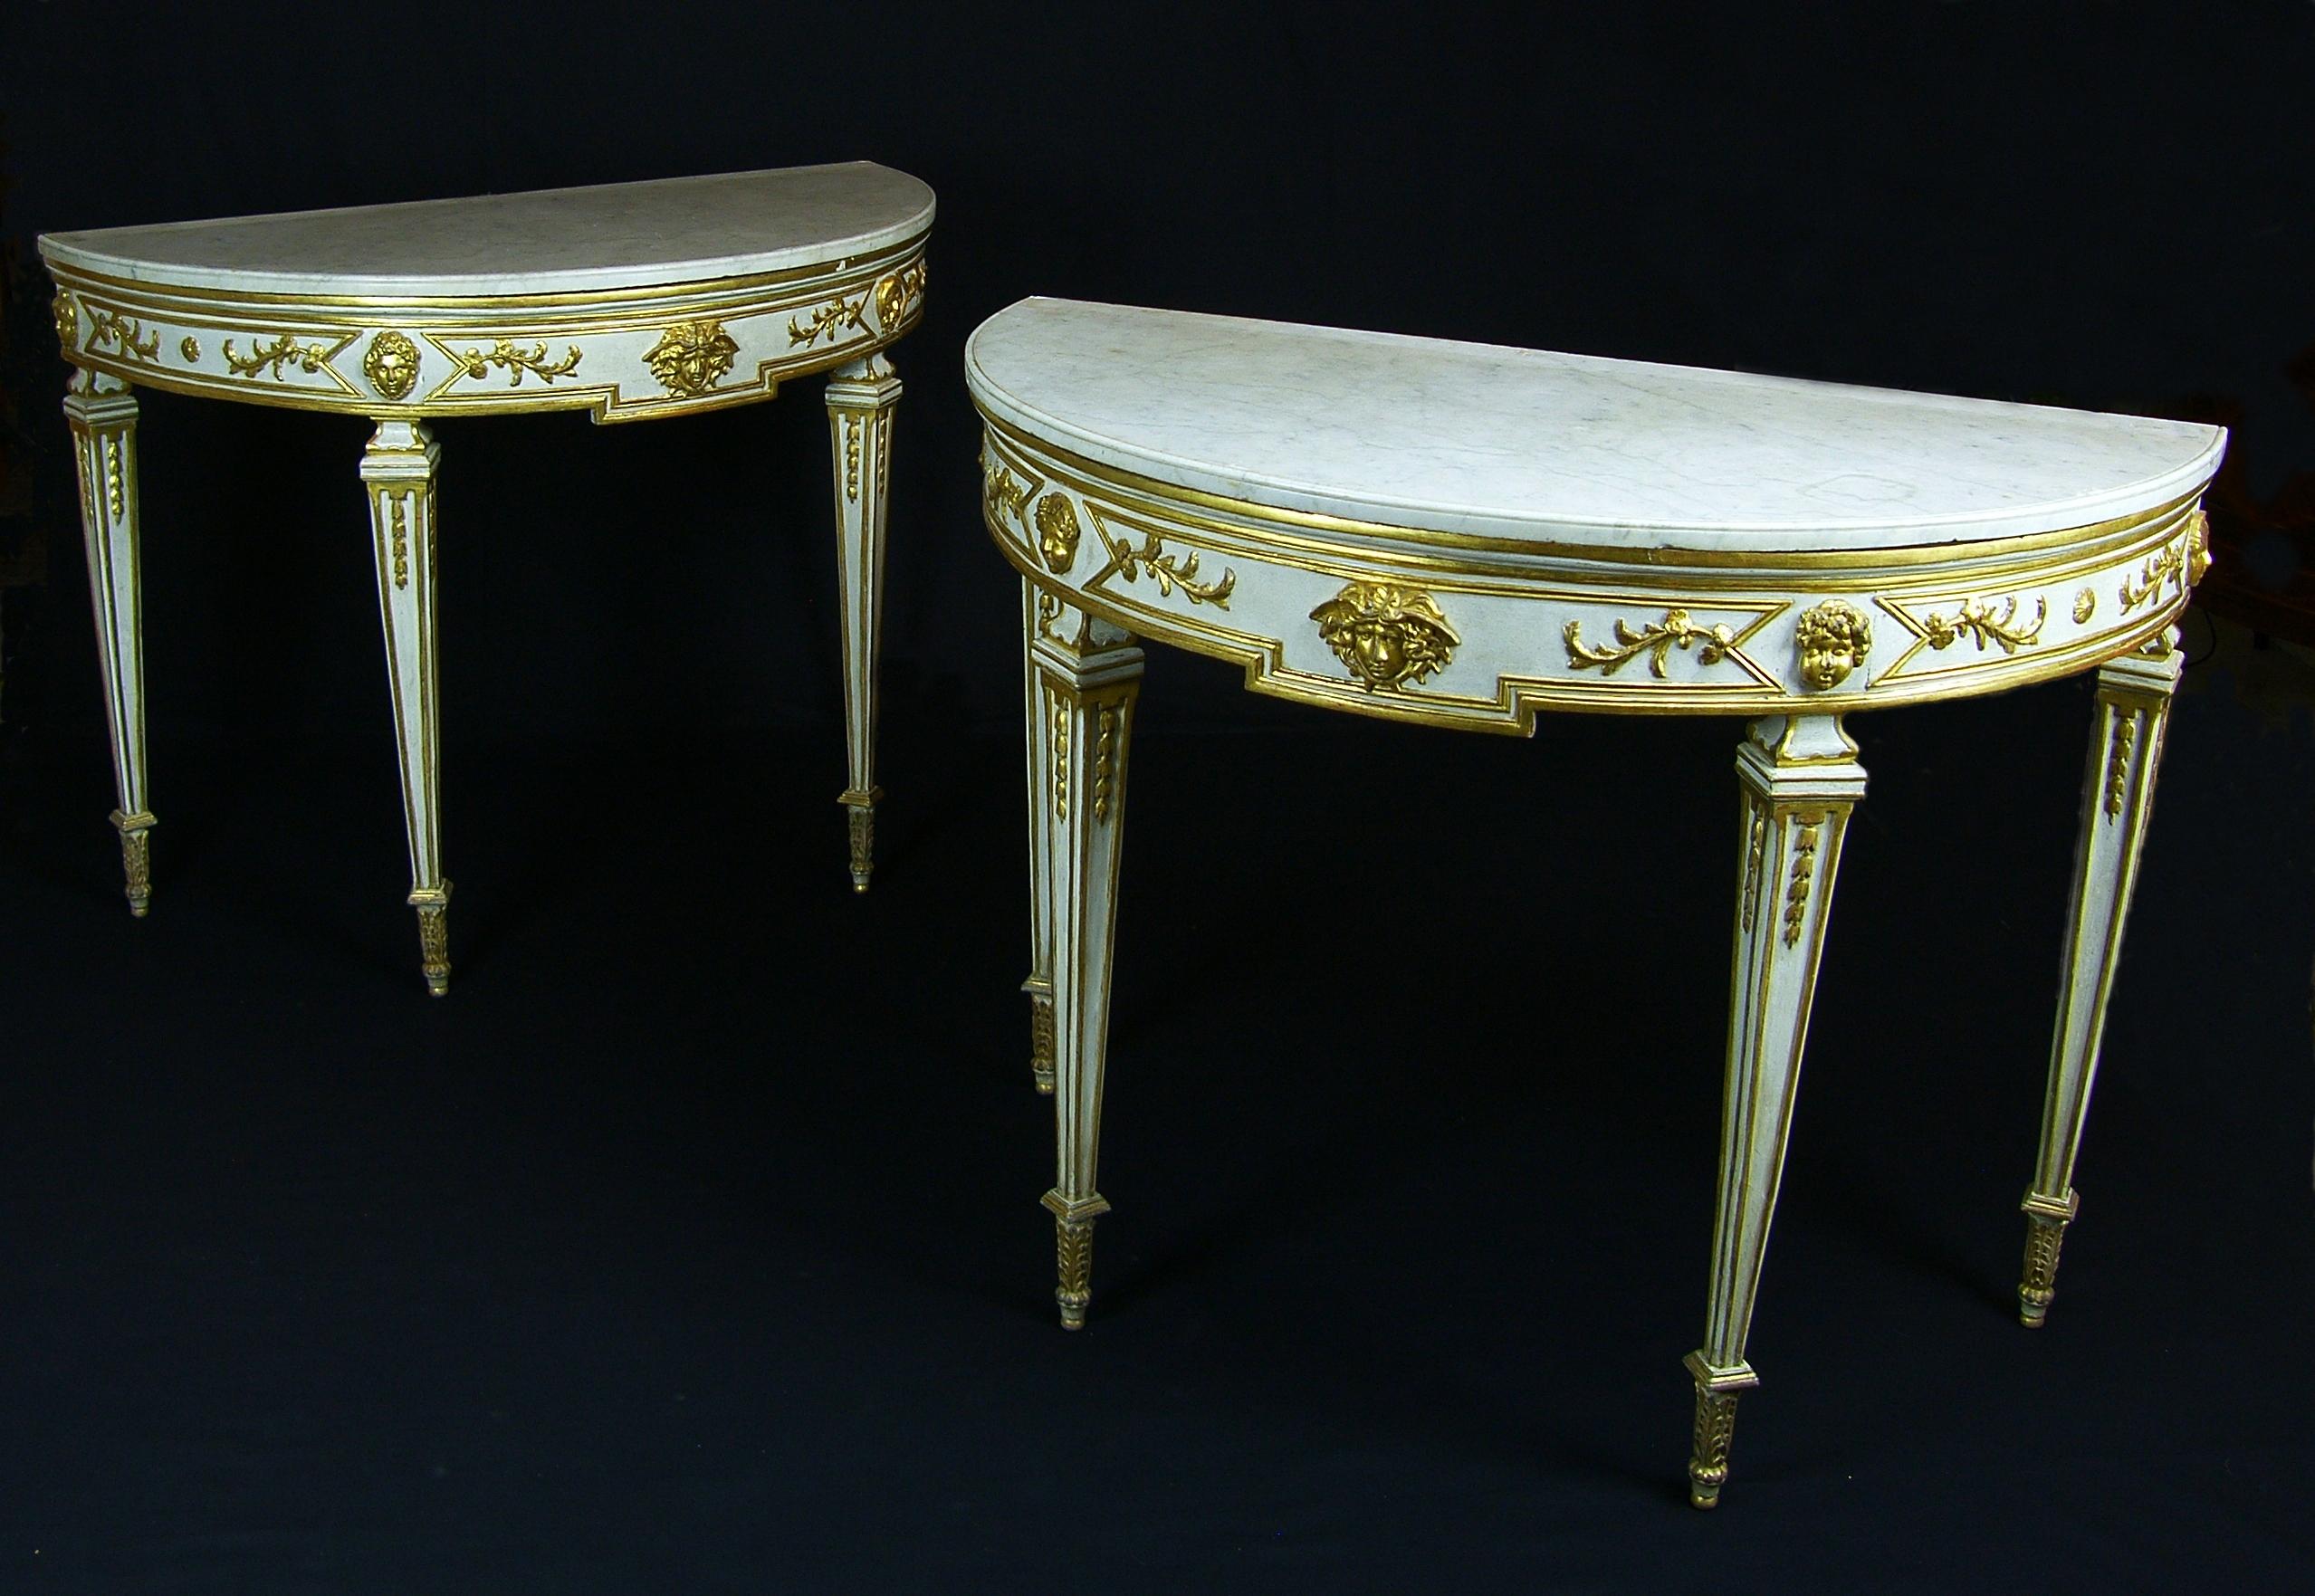 18th century, pair of Italian half-moon lacquered giltwood neoclassical consoles

These elegant wooden consoles finely carved, lacquered and golden, fully represent the taste that was established in Naples at the end of the eighteenth century, in